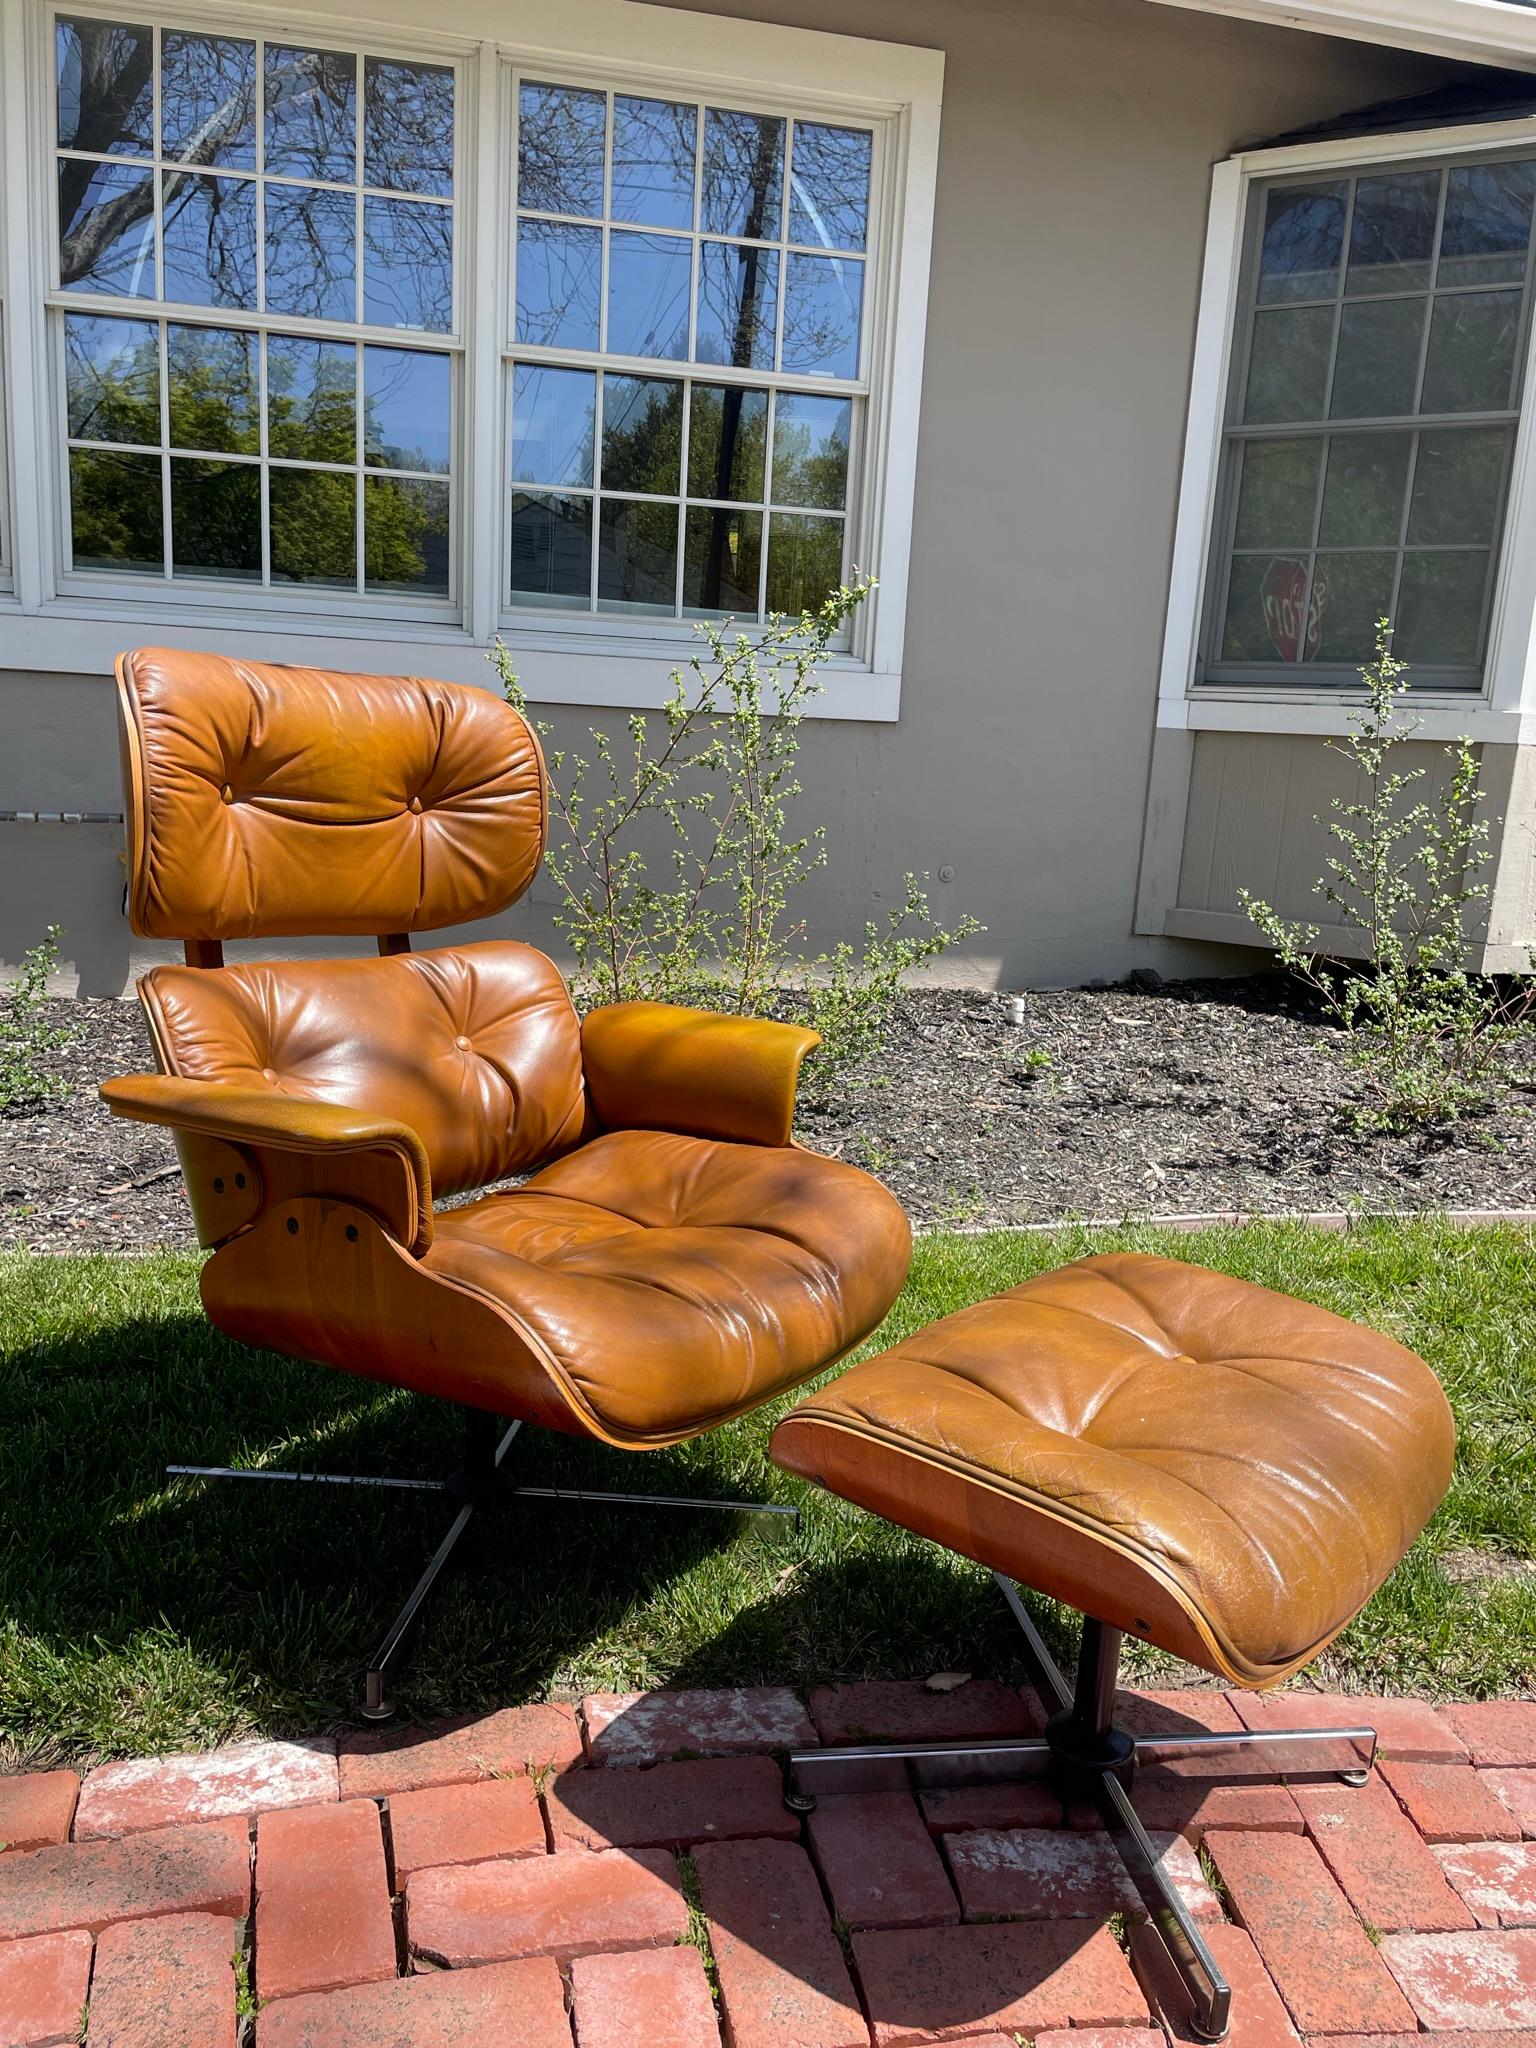 Vintage Eames Style Lounge Chair and Ottoman. Very nice plush upholstery. This chair rocks slightly and swivels but does not recline. Very comfortable, and nice compact size to fit in any space.